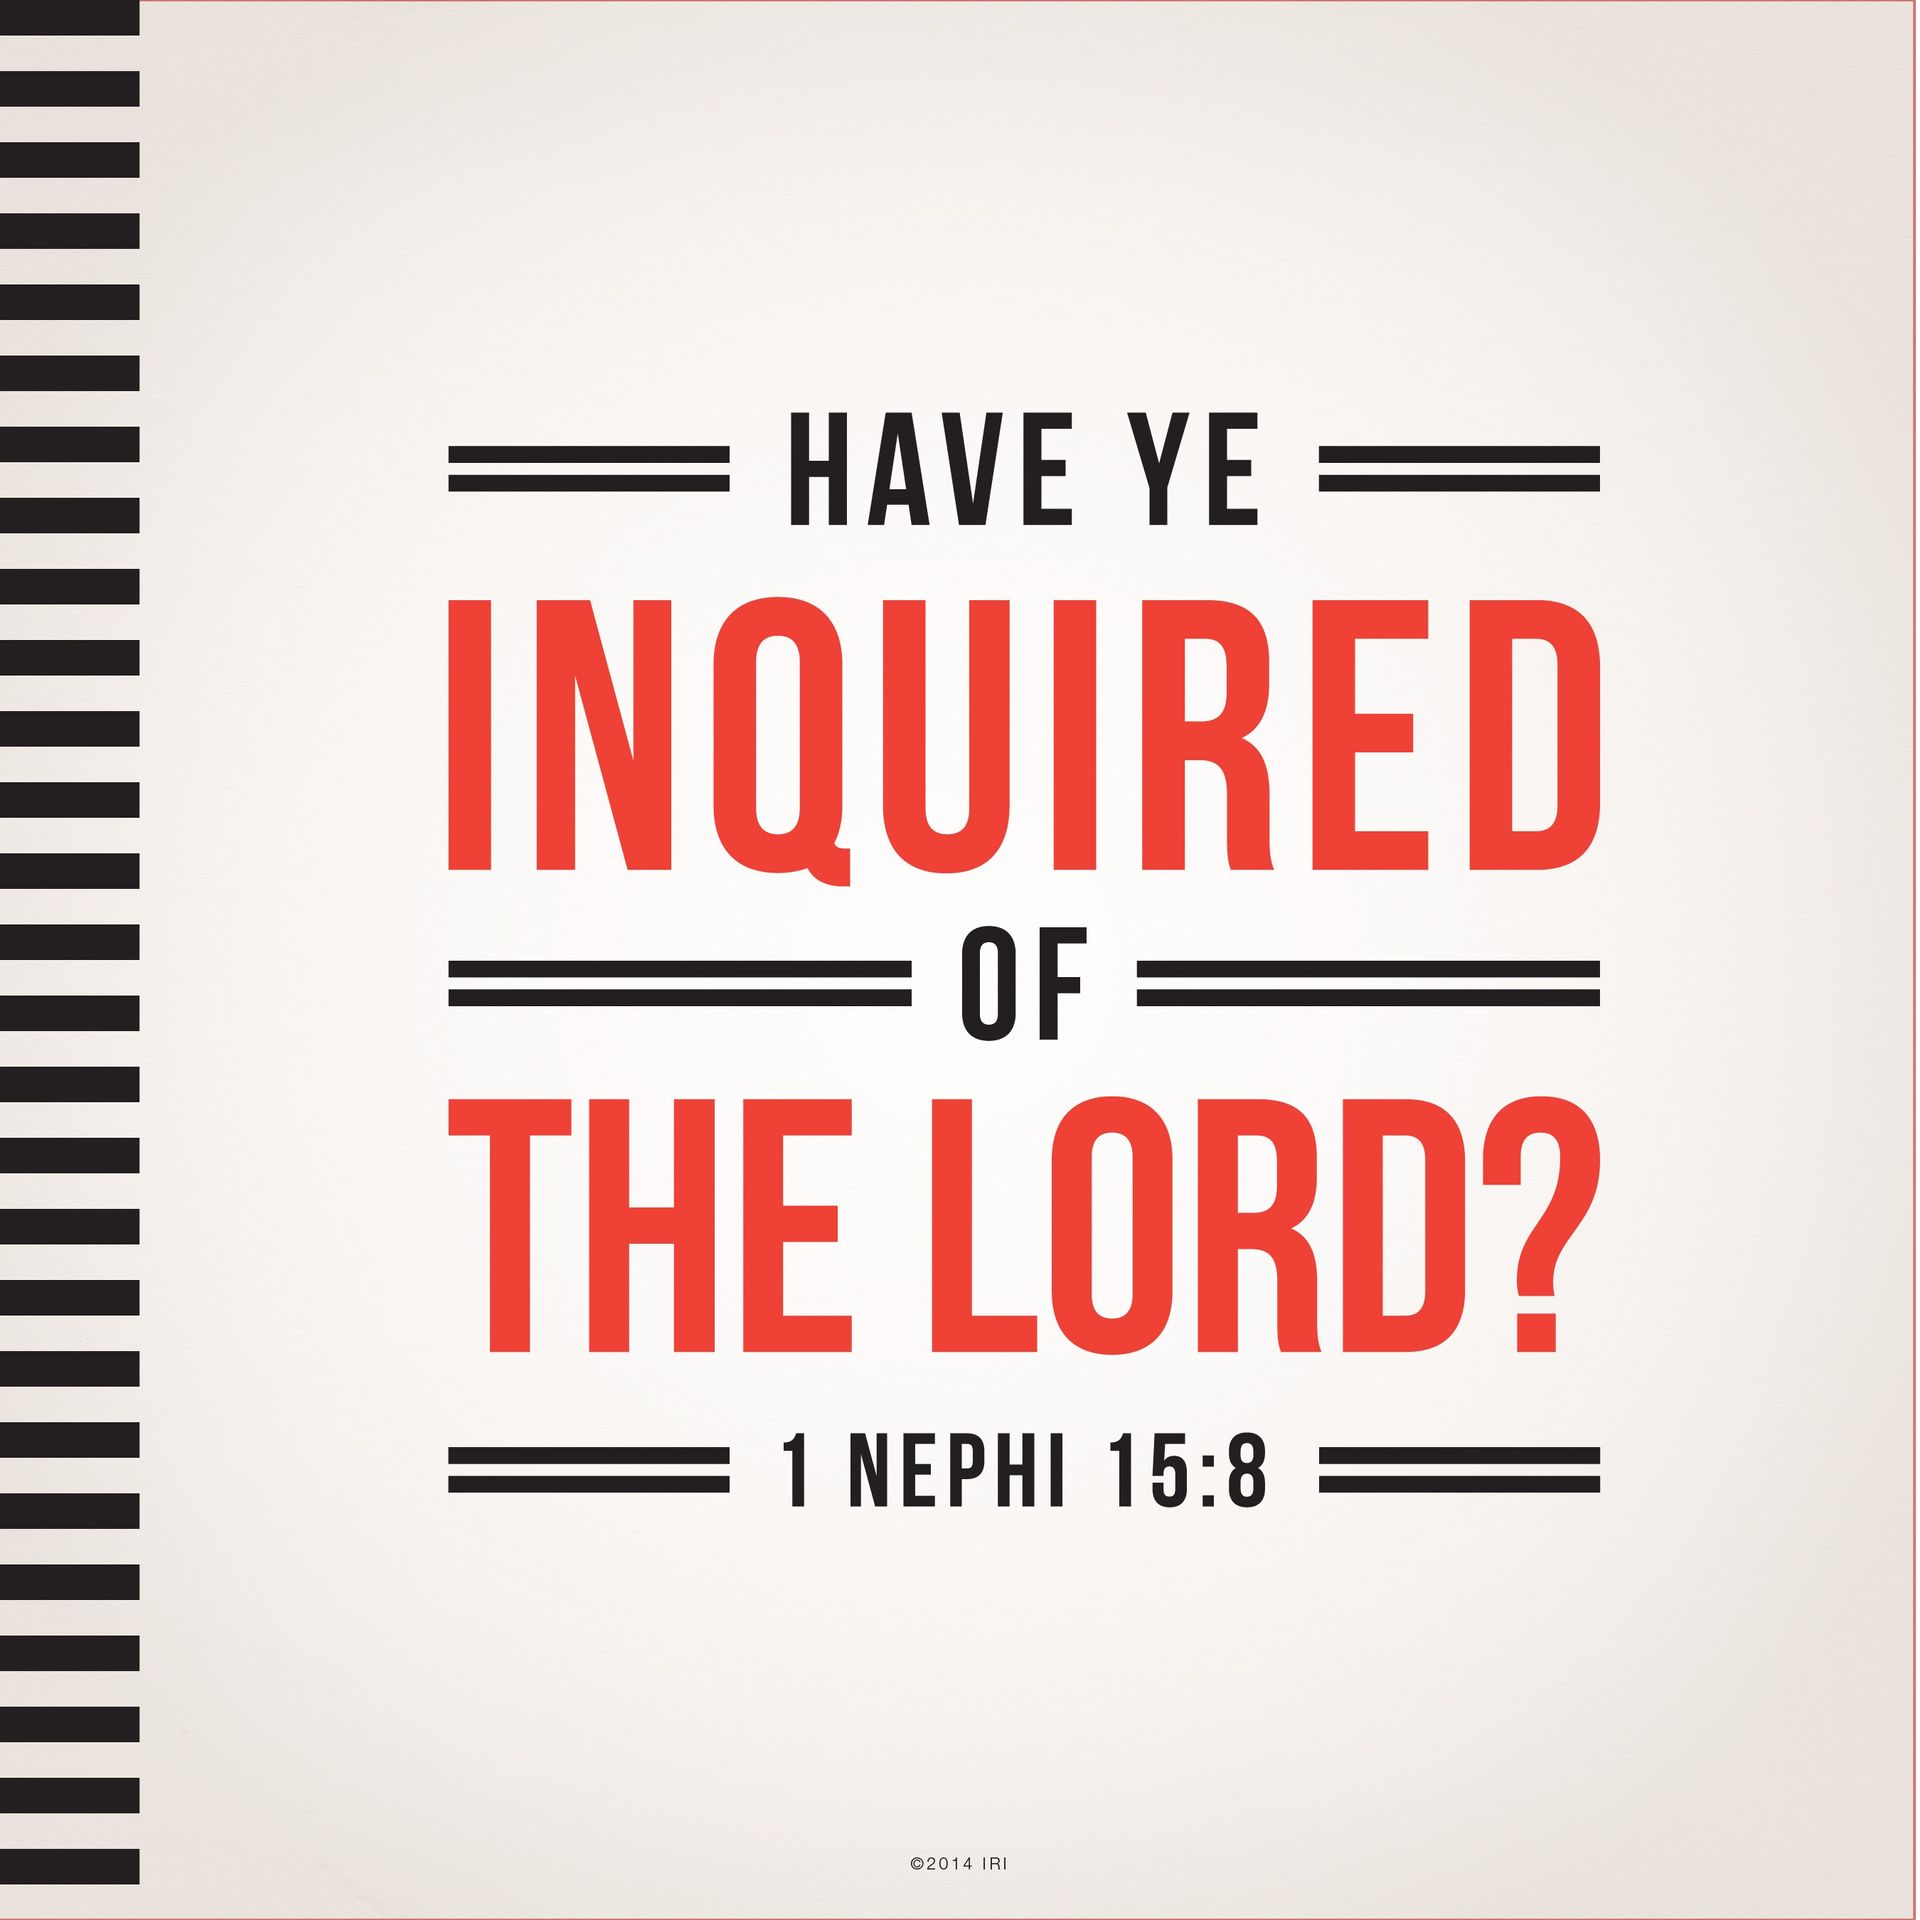 “Have ye inquired of the Lord?” —1 Nephi 15:8